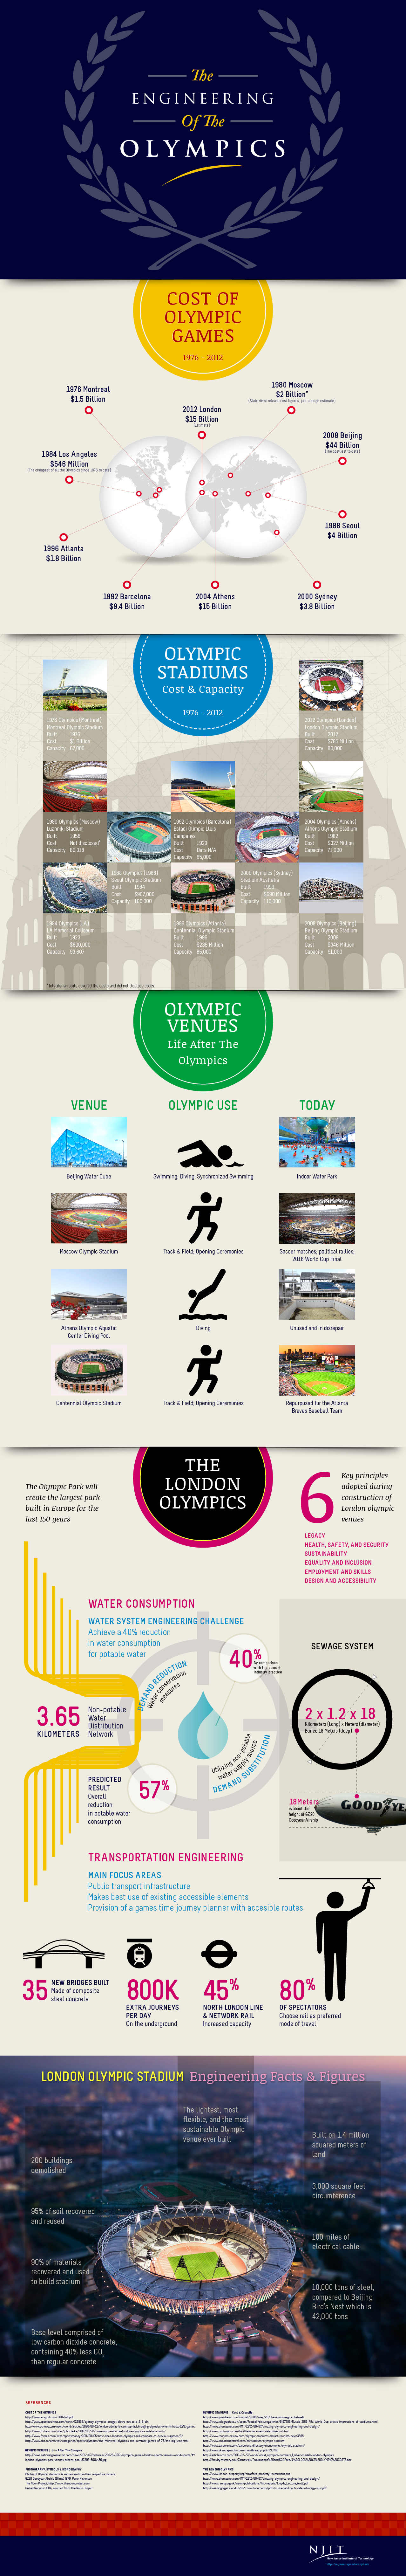 [INFOGRAPHIC] The Engineering of the Olympics